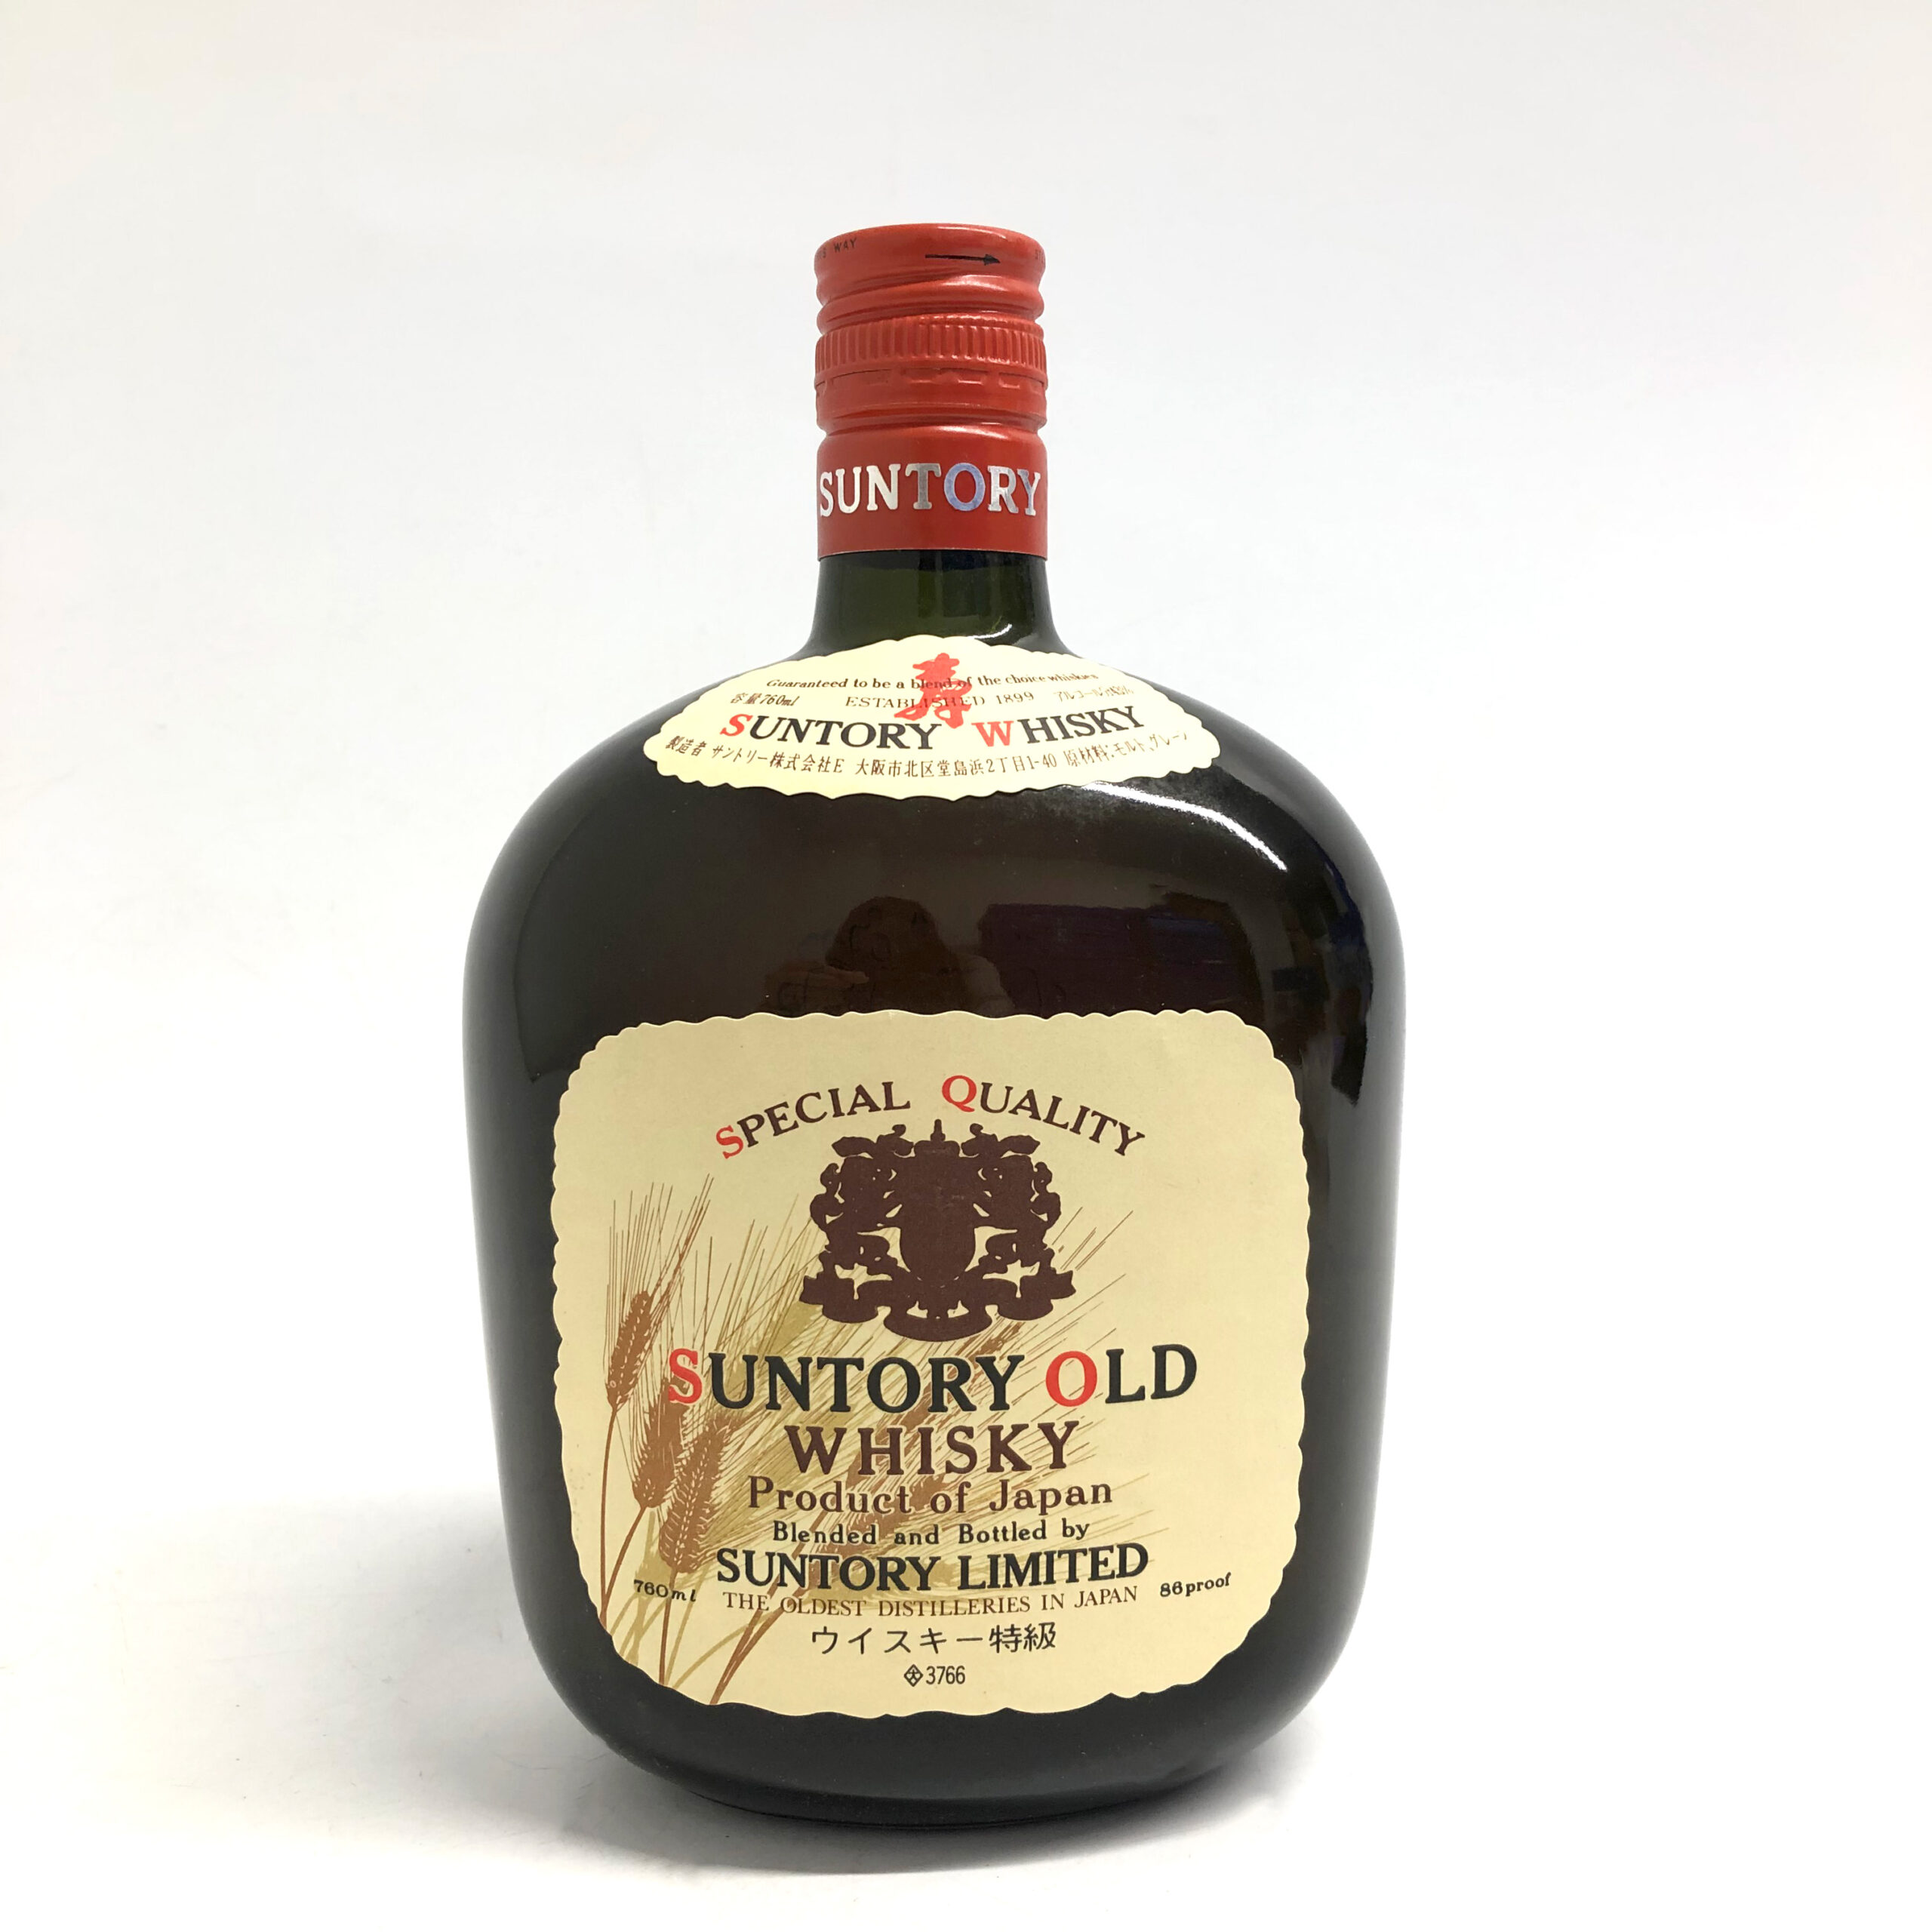 【Suntory Old】It has been on the market for 70 years since it was launched in 1950 and has continued to be improved in line with the times. It became hugely popular in the 1970s thanks to its television commercials.